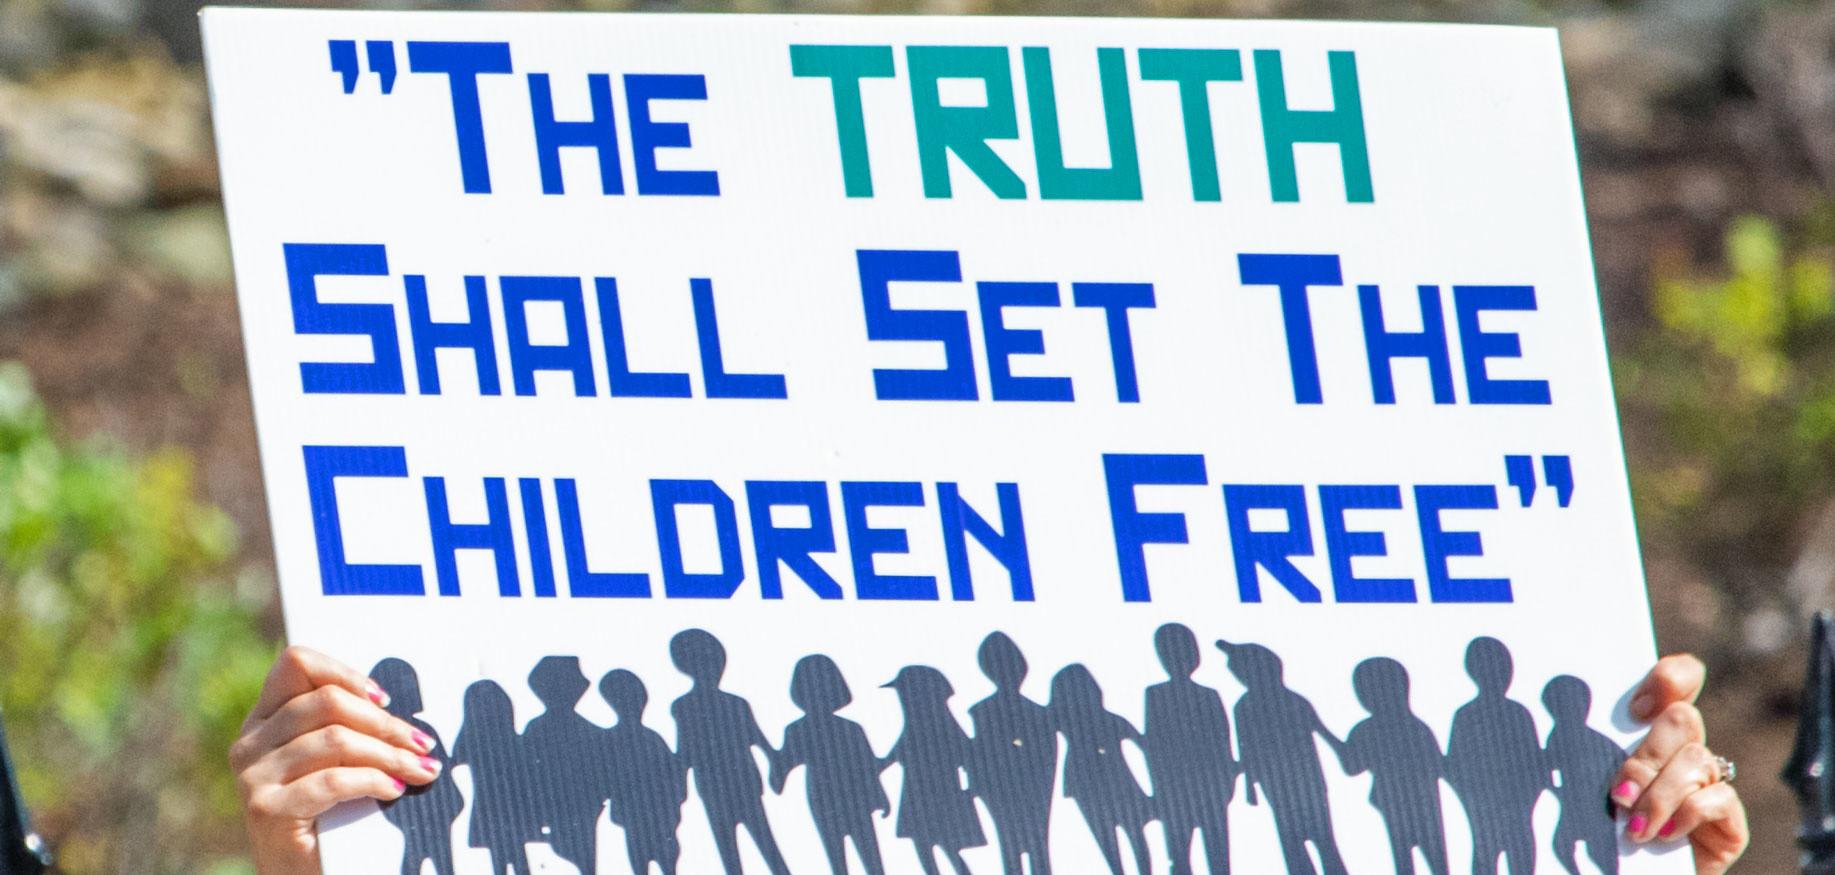 A sign that says "The Truth shall set the children free."